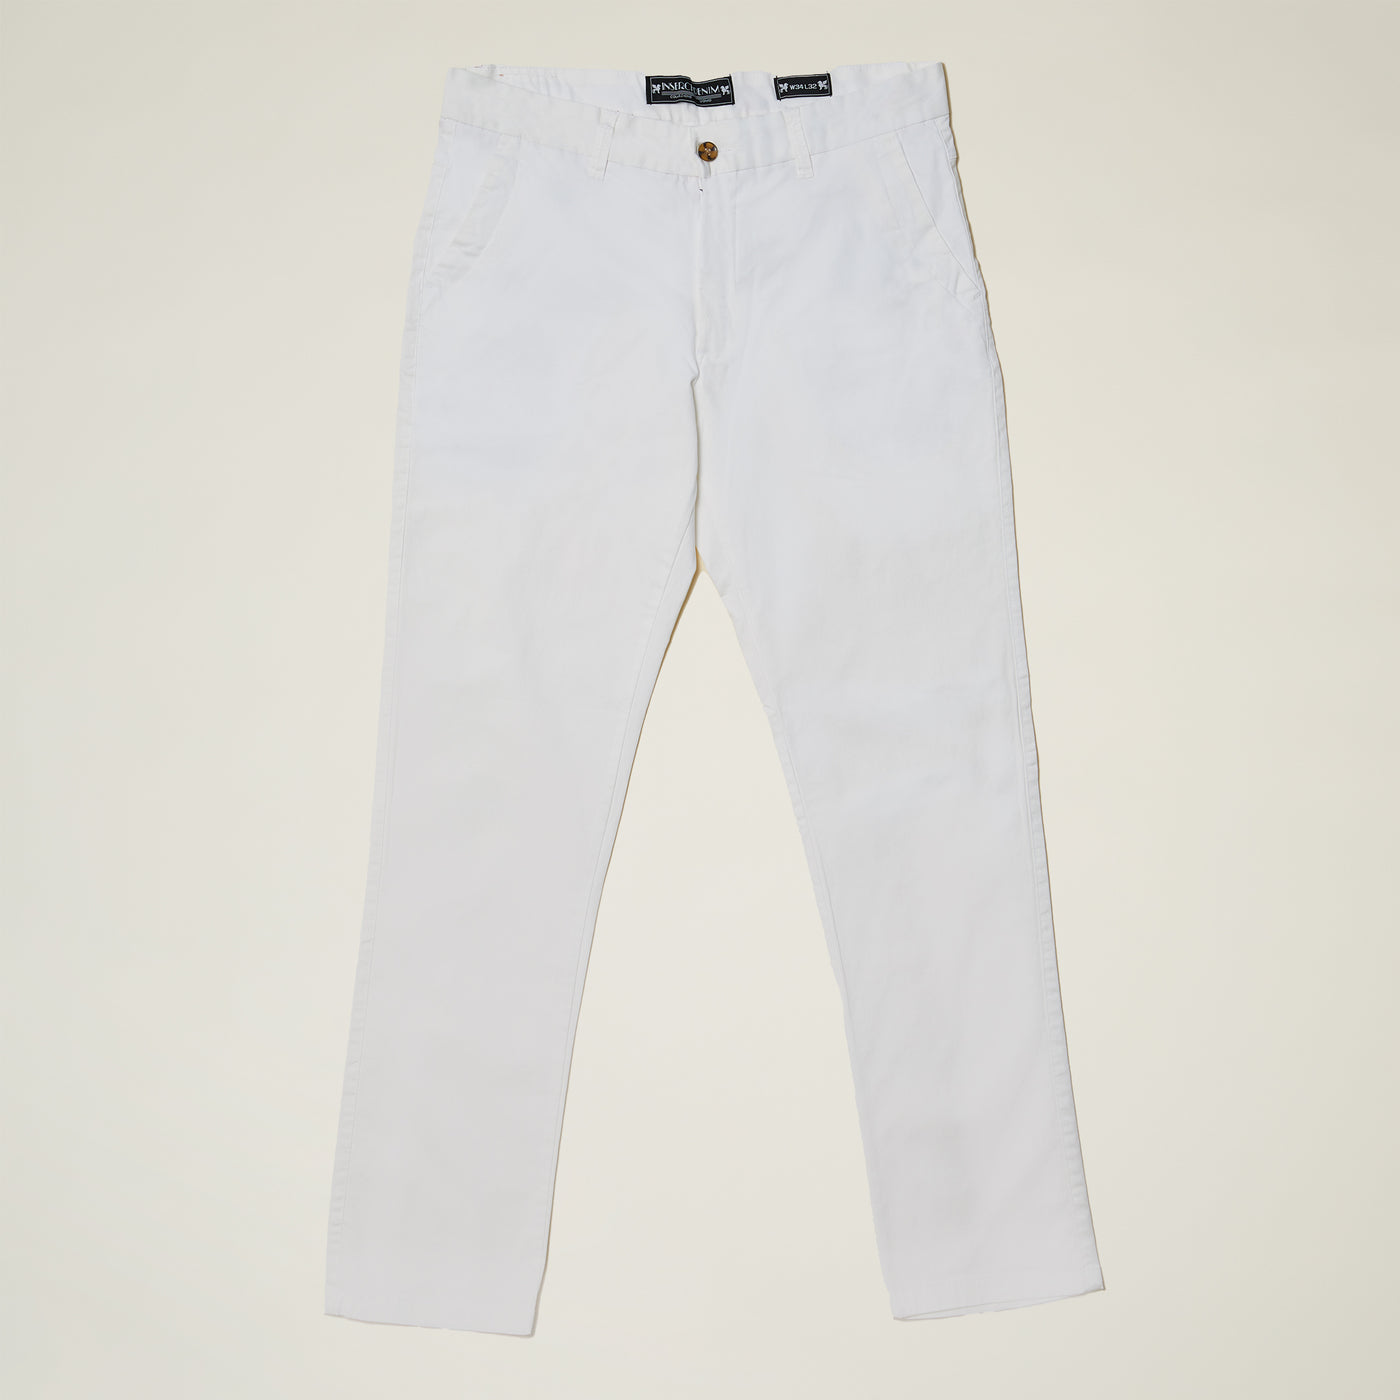 Brushed Cotton Chinos - INSERCH